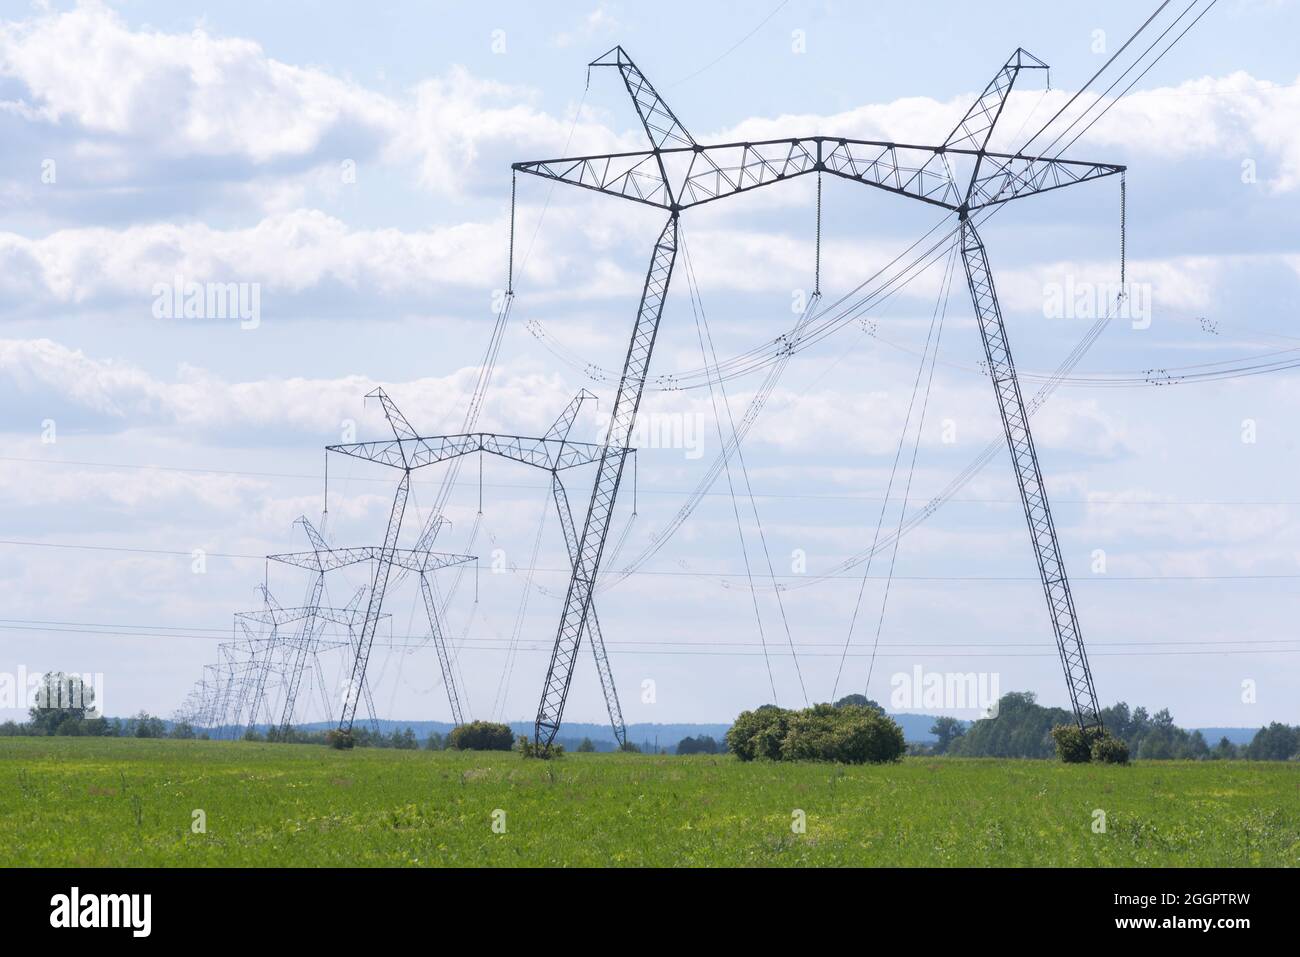 A view of power lines, electric power transmissions in a field in western Ukraine.Prime Minister of Ukraine, Denis Shmygal announced that from October 1st, the cost of electricity for 80% of the population will decrease following the Cabinet of Ministers passing a resolution which reduced the electricity tariff to UAH 1.44 per kilowatt/hour if households consume less than 250 kilowatt/hours per month. At the same time, if the household uses more than this norm, then all consumed electricity must be paid at full price - UAH 1.68 per kWh. Stock Photo